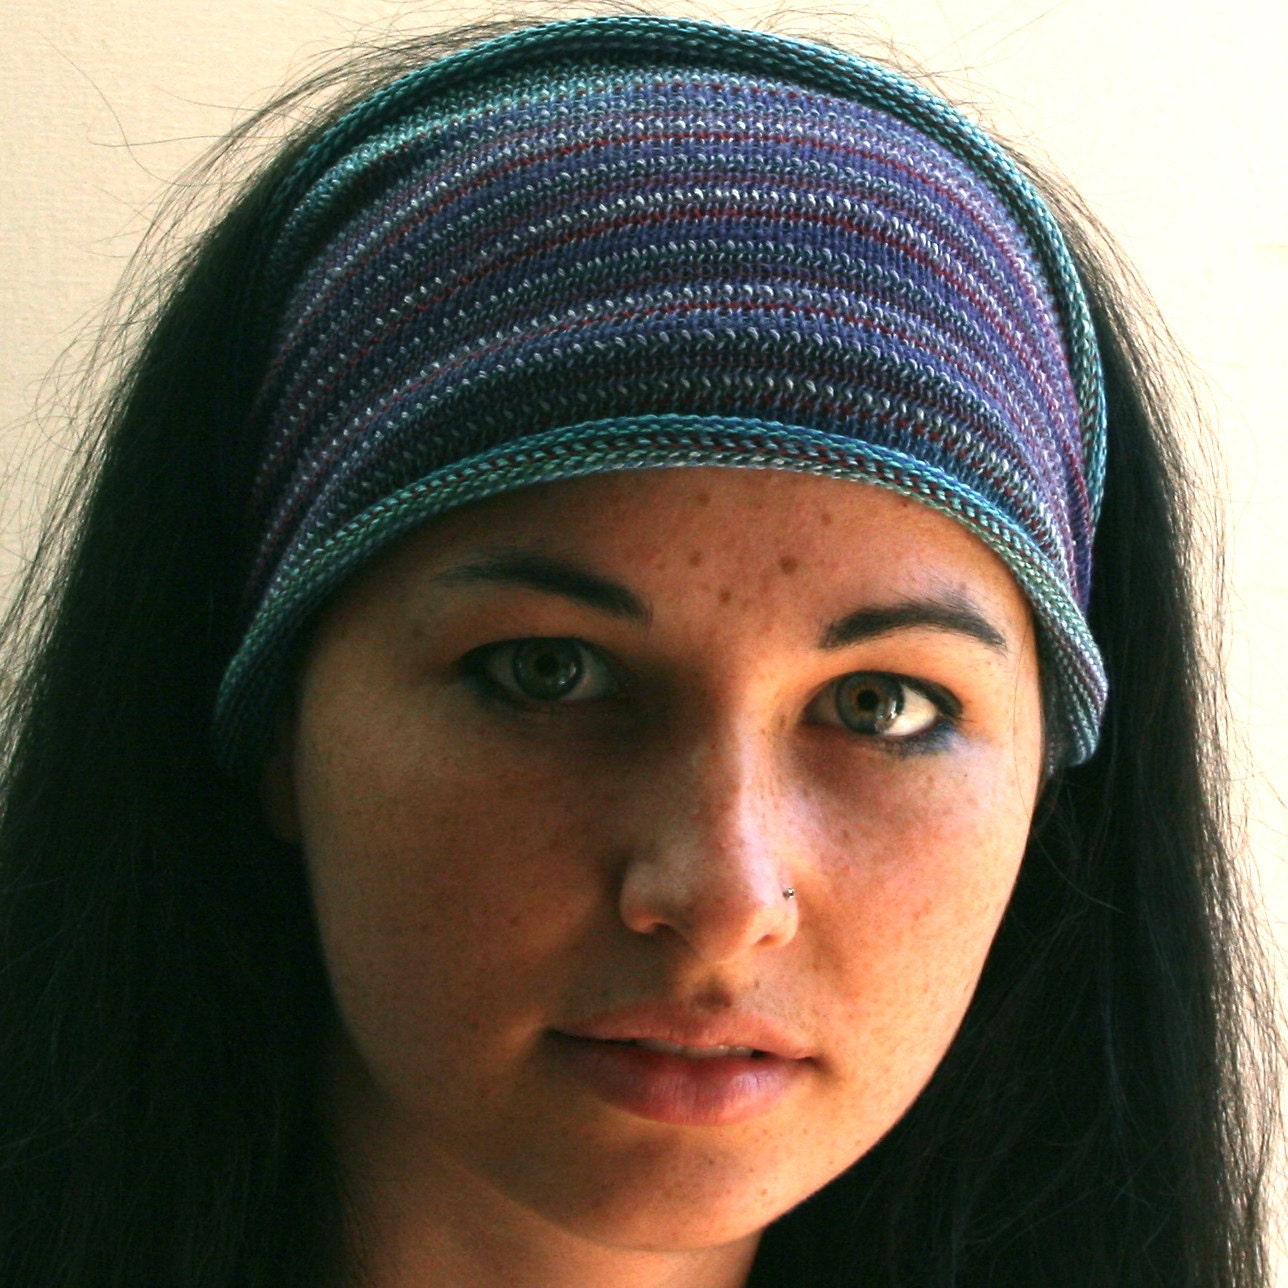 Headband / Dread Wrap / Head wrap in Violet and Blue